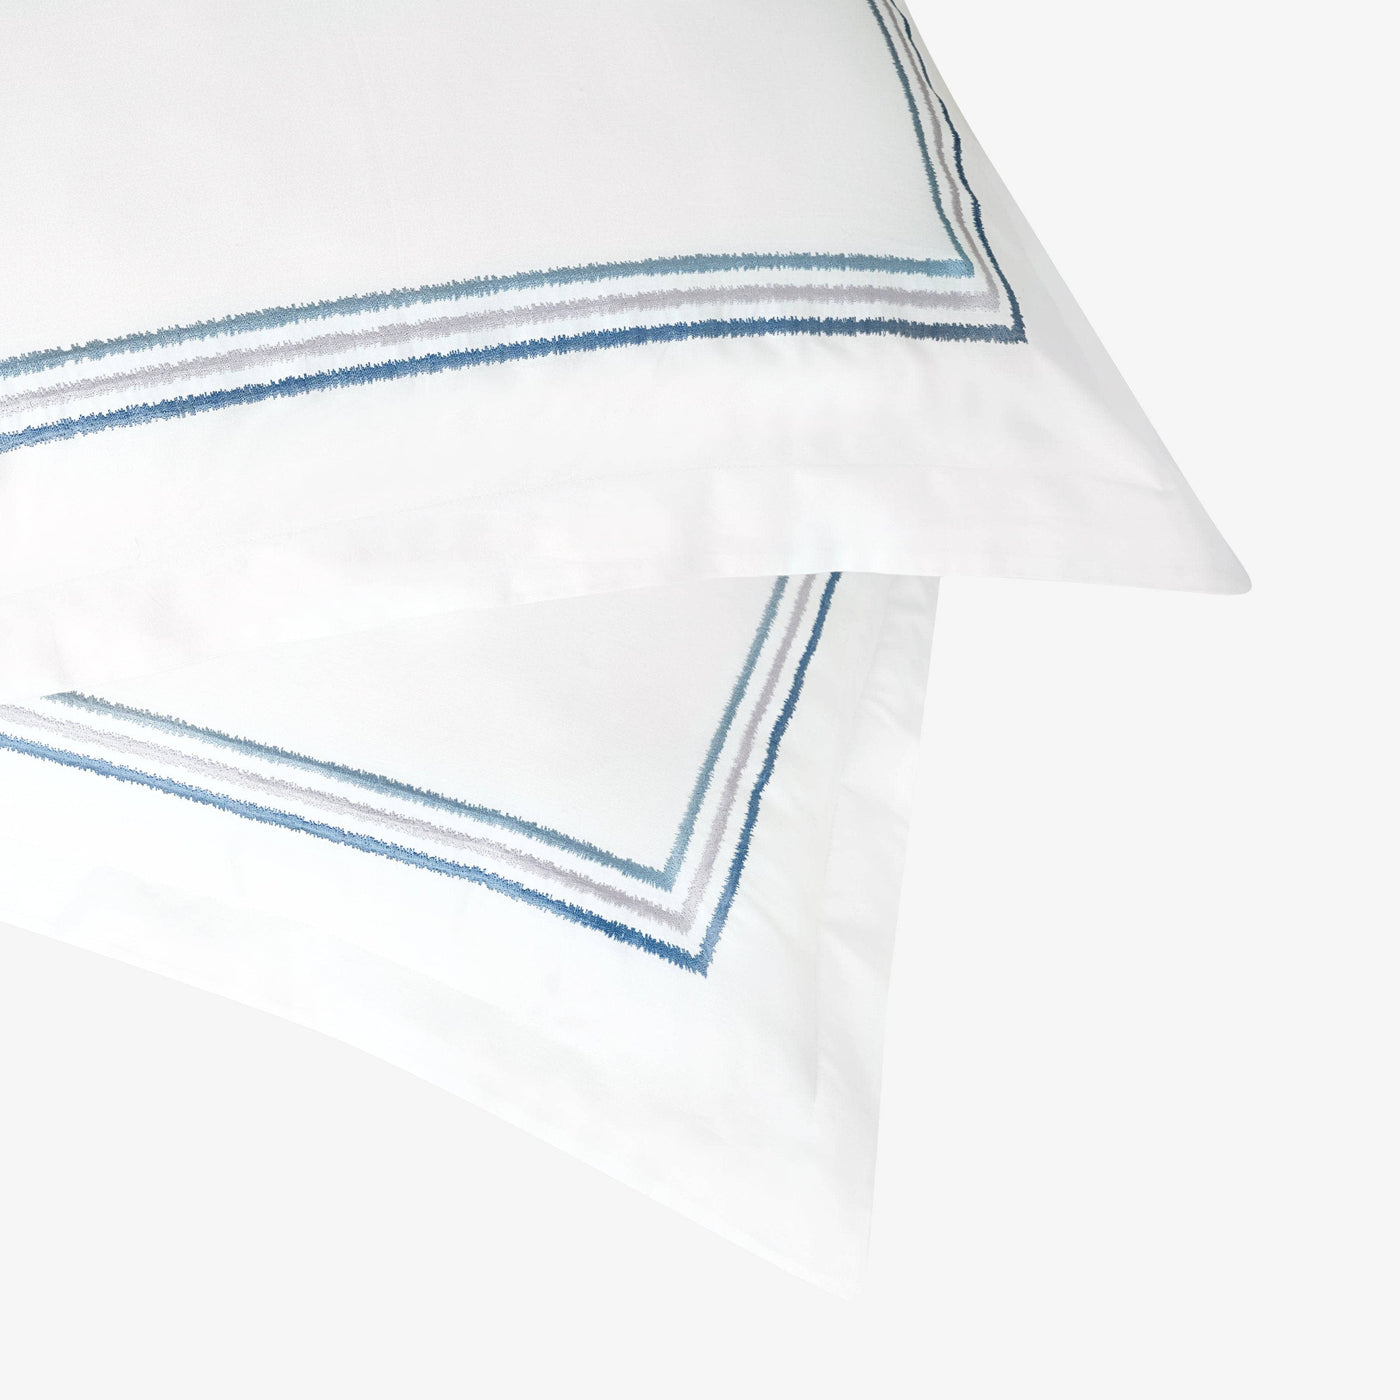 Darcy Embroidered 100% Turkish Cotton 210 TC Duvet Cover + Fitted Sheet + 4 Pillowcases, White - Blue, King Size 4